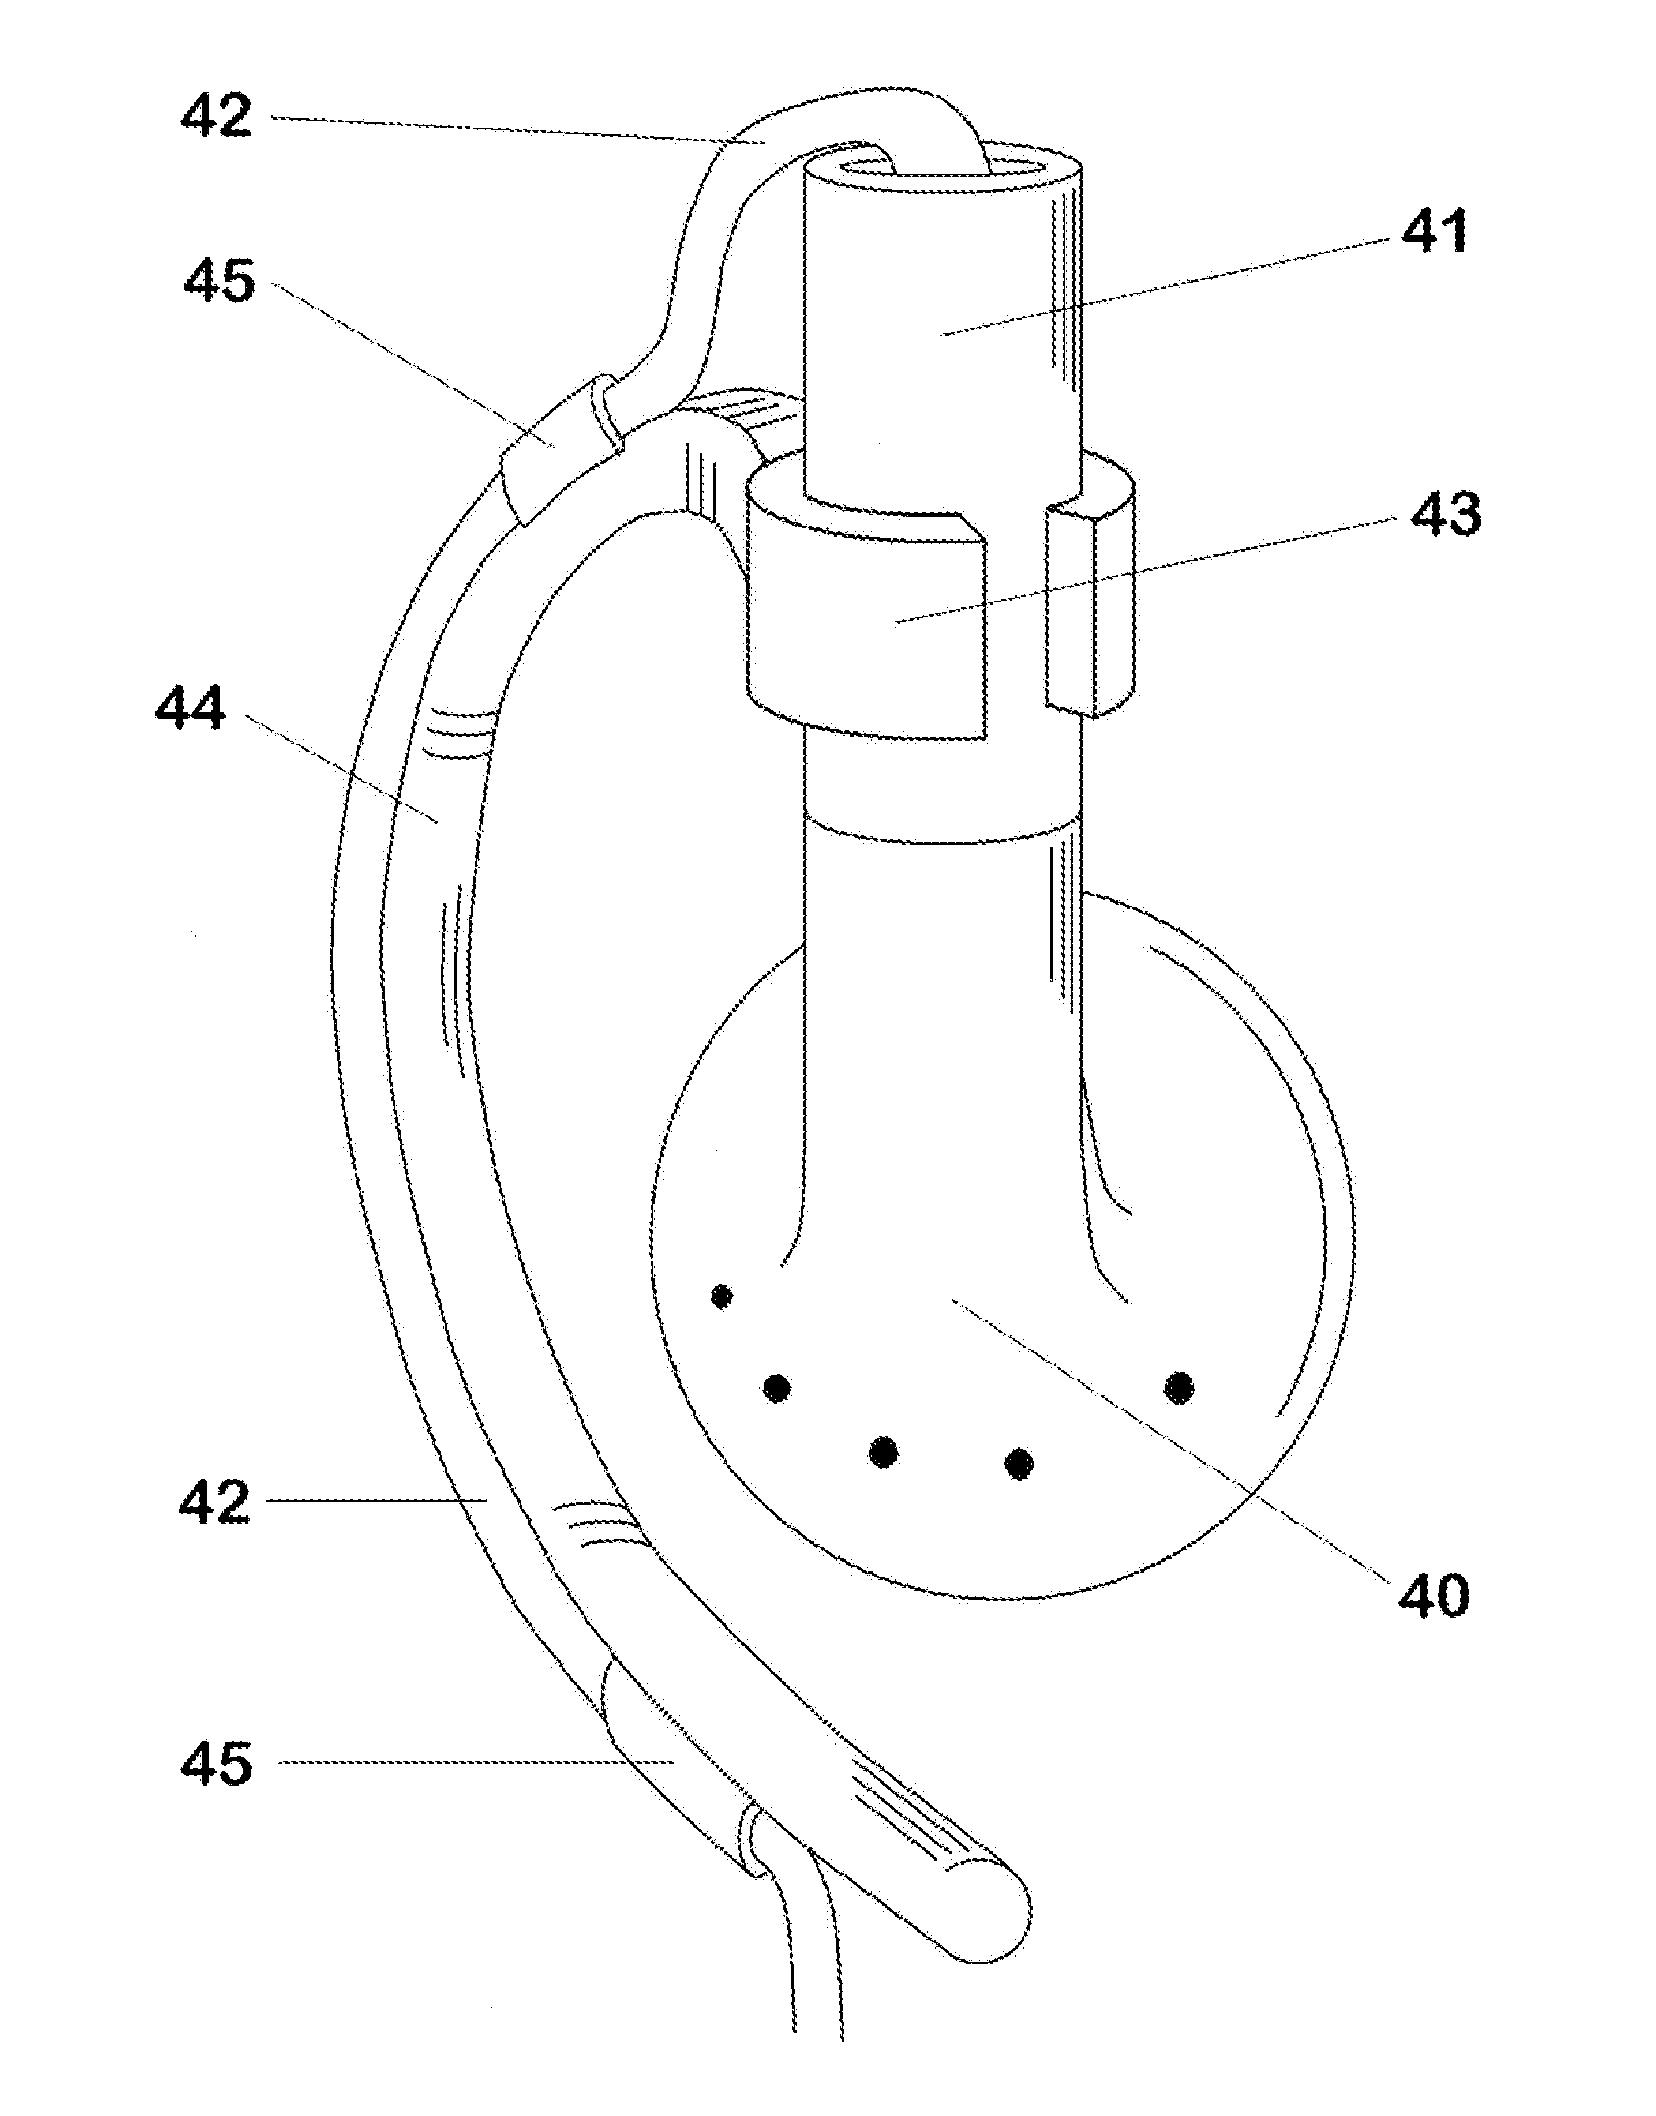 Earbud Positioning Device